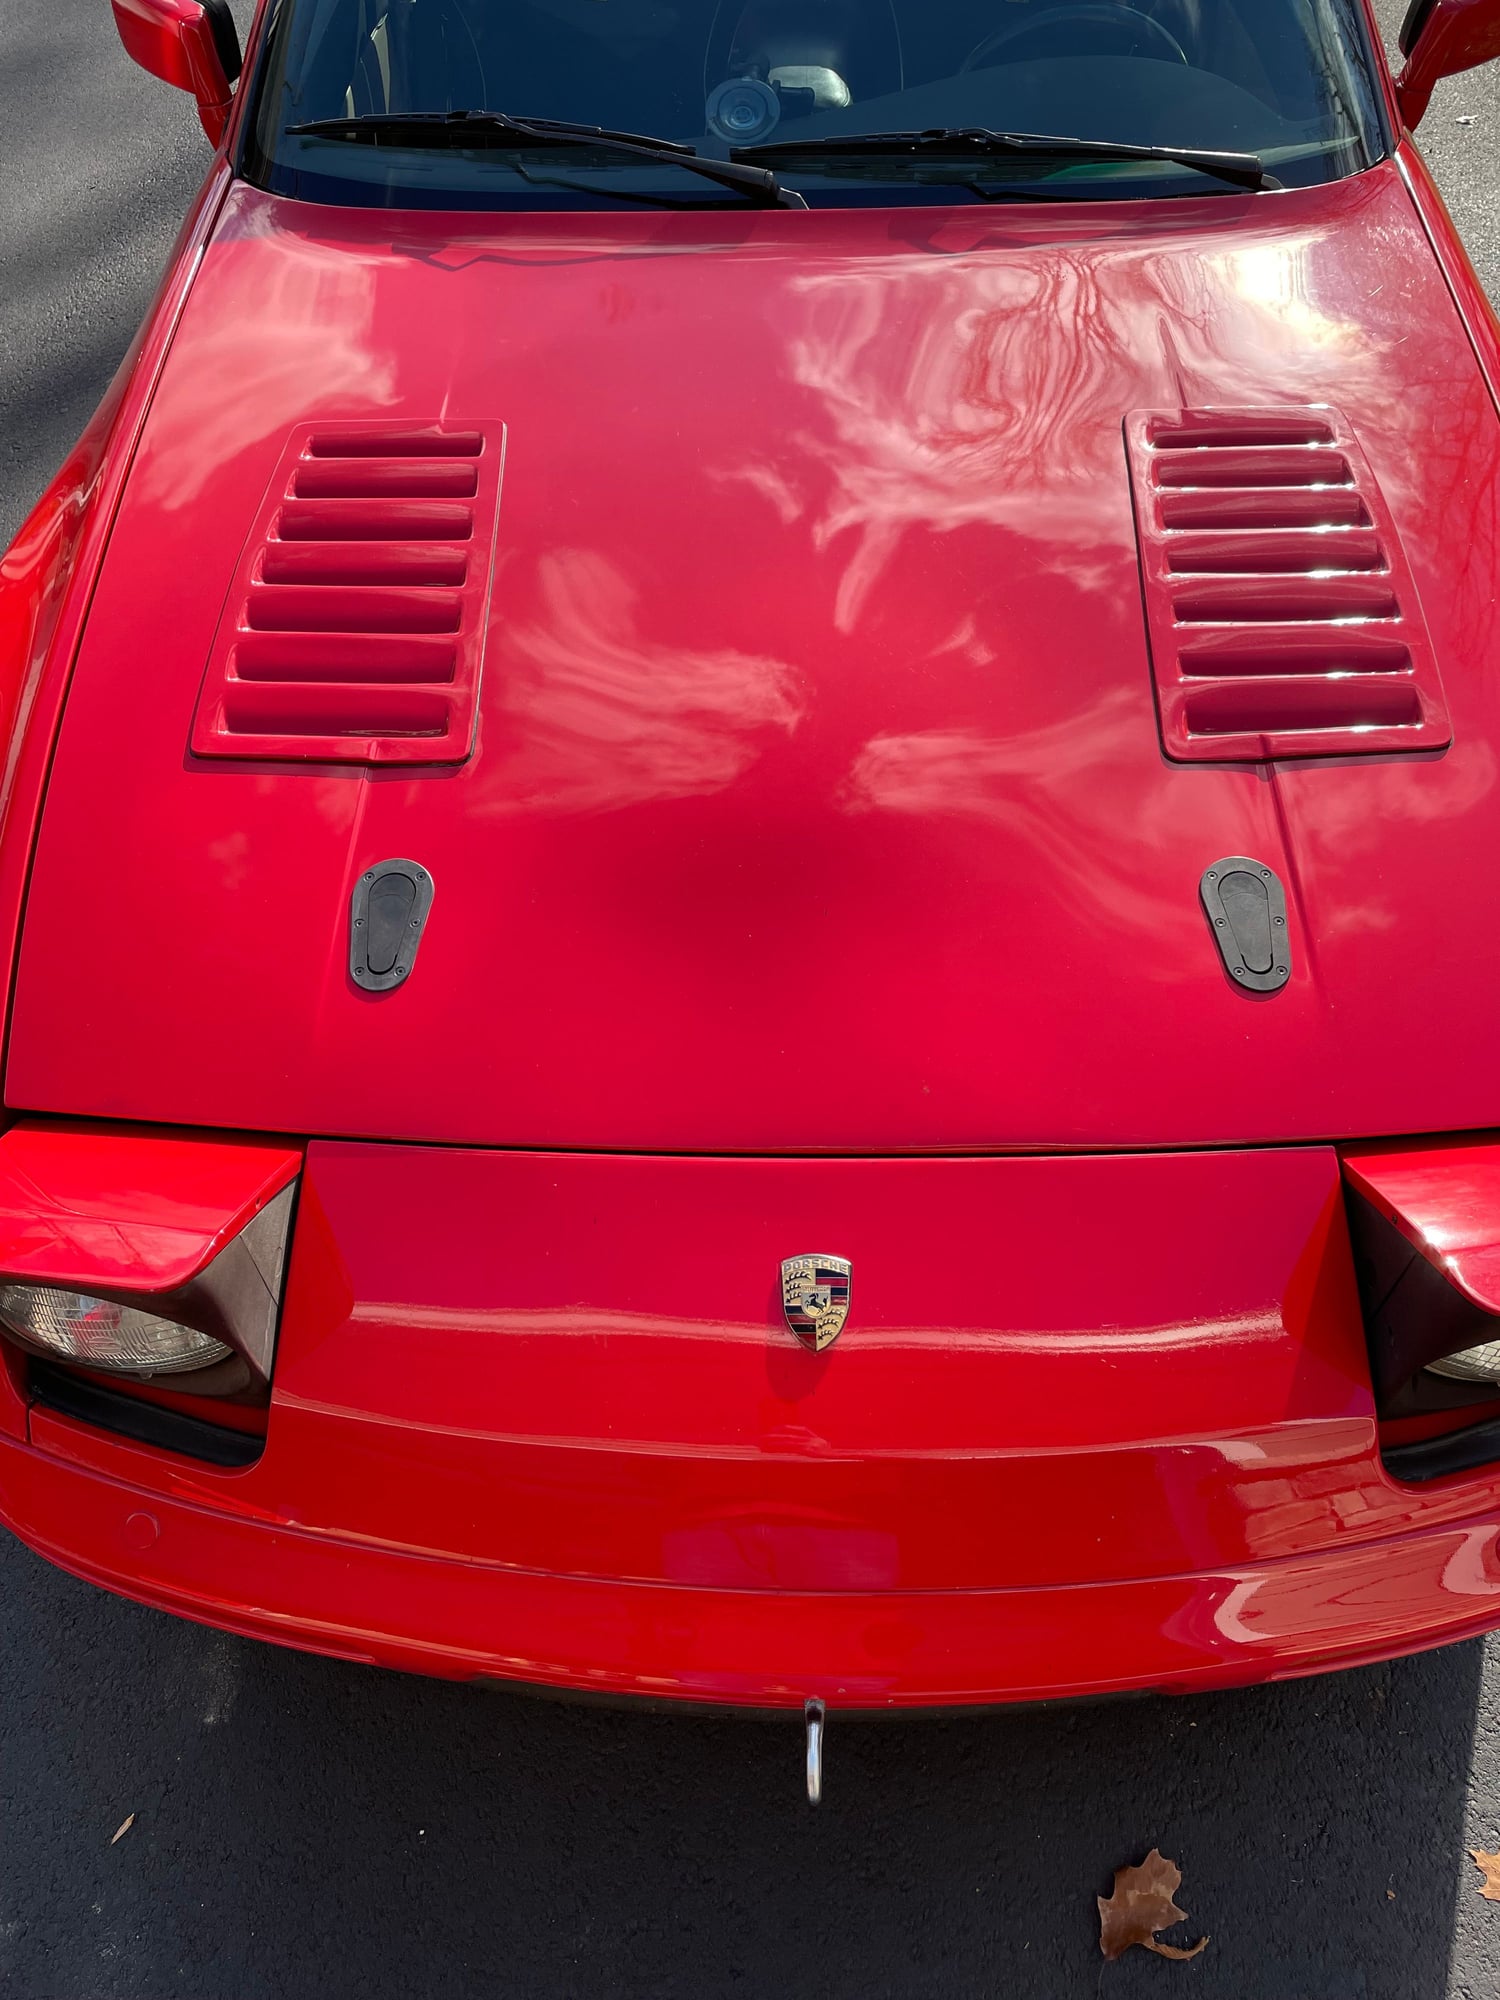 Exterior Body Parts - 951 Body Panels and Forgeline Wheels - Used - 1983 to 1991 Porsche 944 - Cincinnati, OH 45245, United States